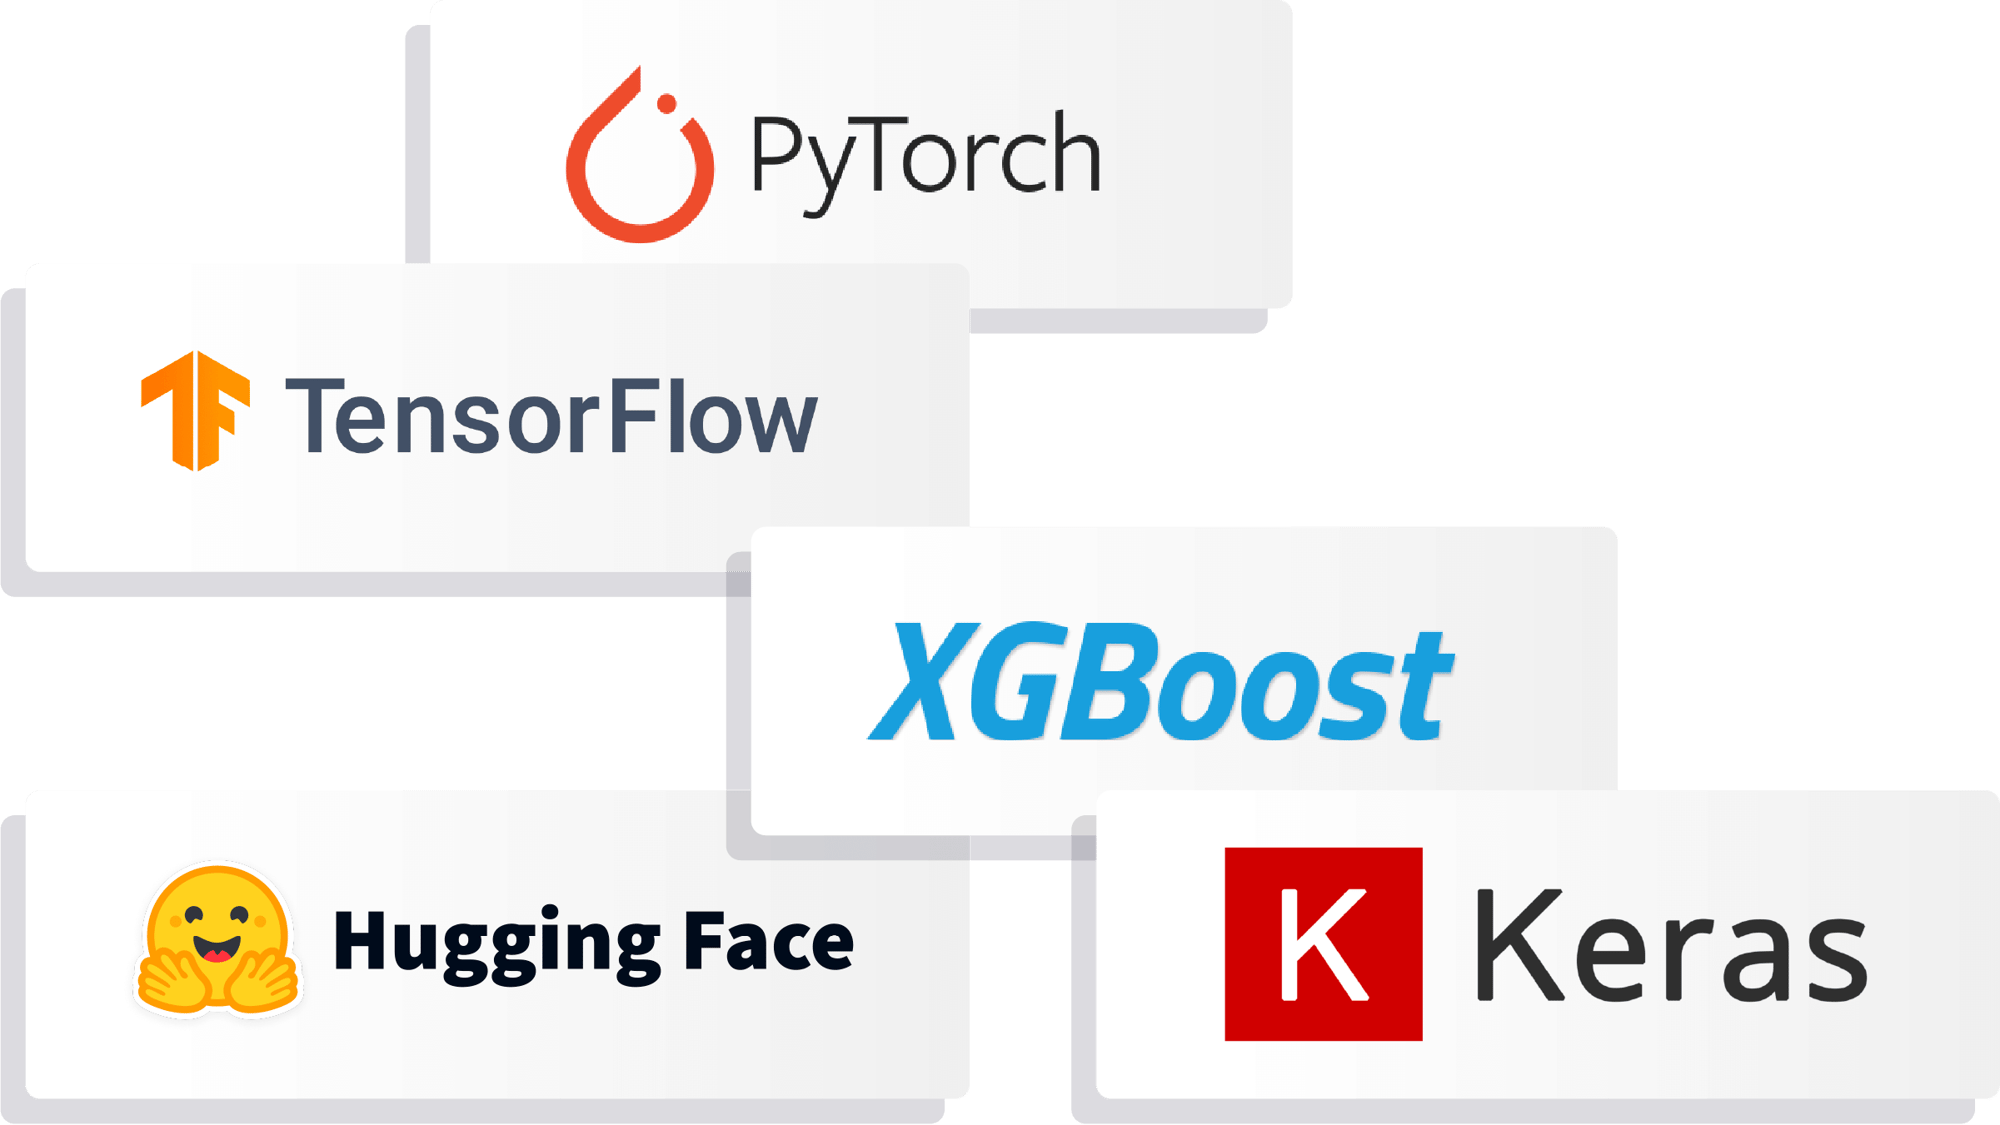 Five overlapping white boxes, each containing a single logo, including (from top) PyTorch, TensorFlow, XGBoost, HuggingFace, and Keras.